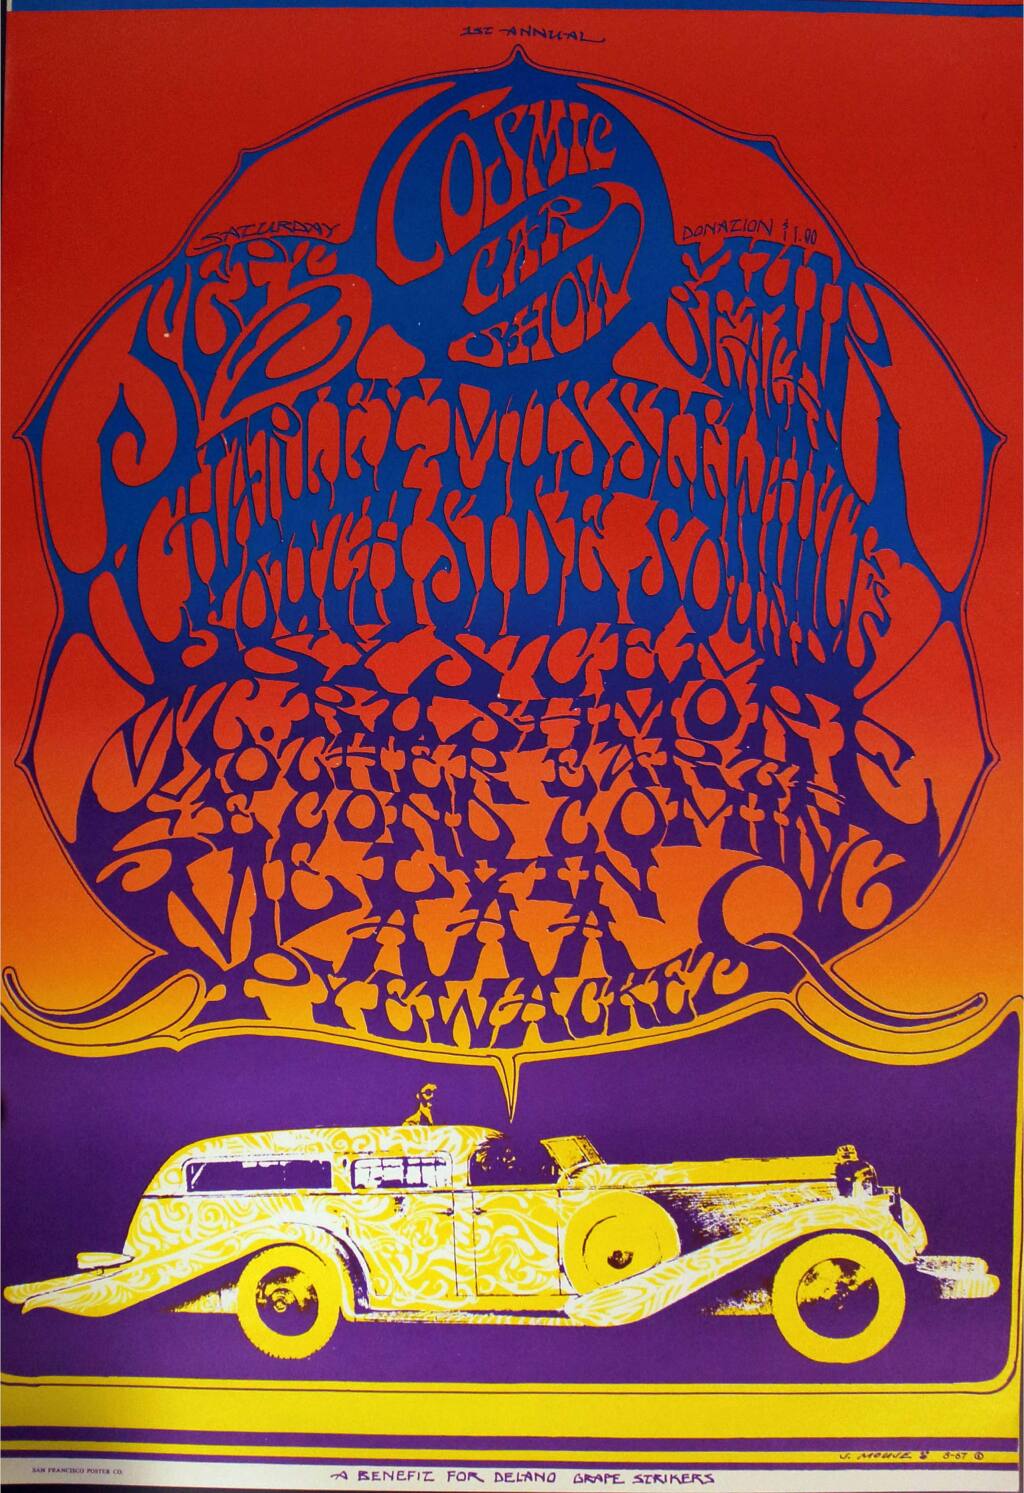 One of the classic psychedelic 1960s posters by longtime Sonoma County resident Stanley Mouse at the Museums of Sonoma County exhibit 'And the Beat Goes On.' (MUSEUMS OF SONOMA COUNTY)